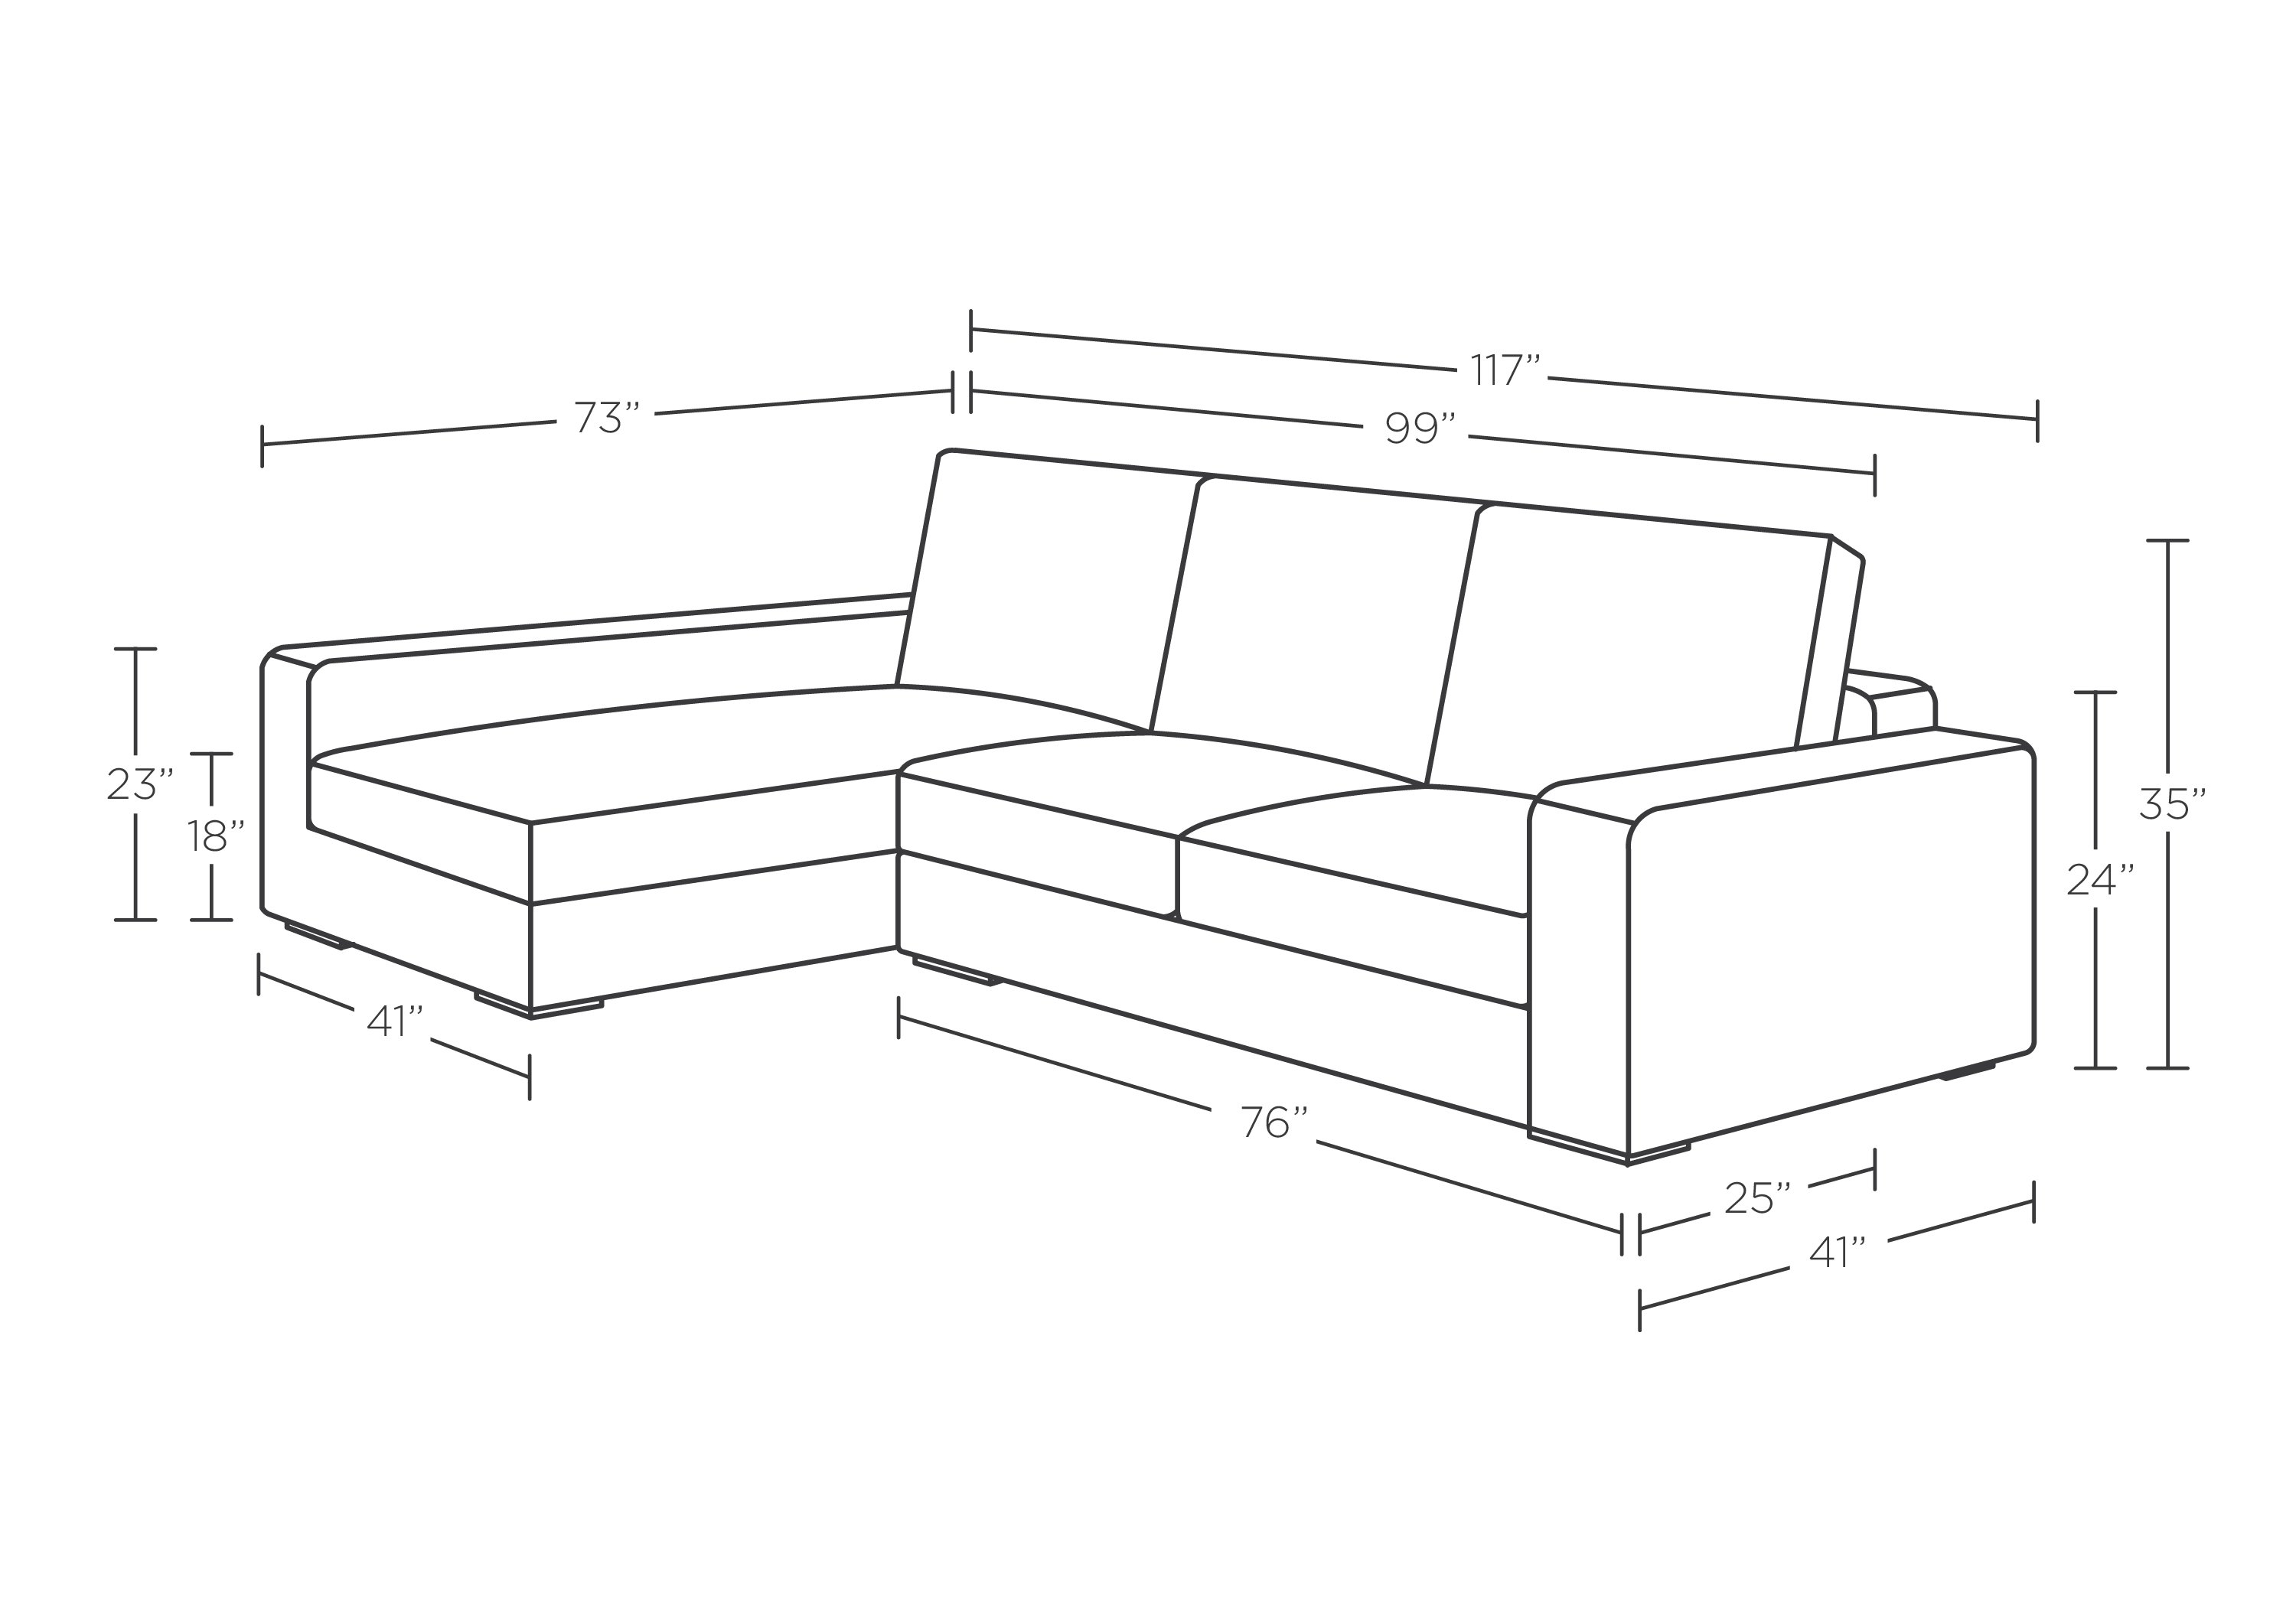 AINSLEY Sectional Sofa with Left Chaise - Decide Later fabric - Image 1